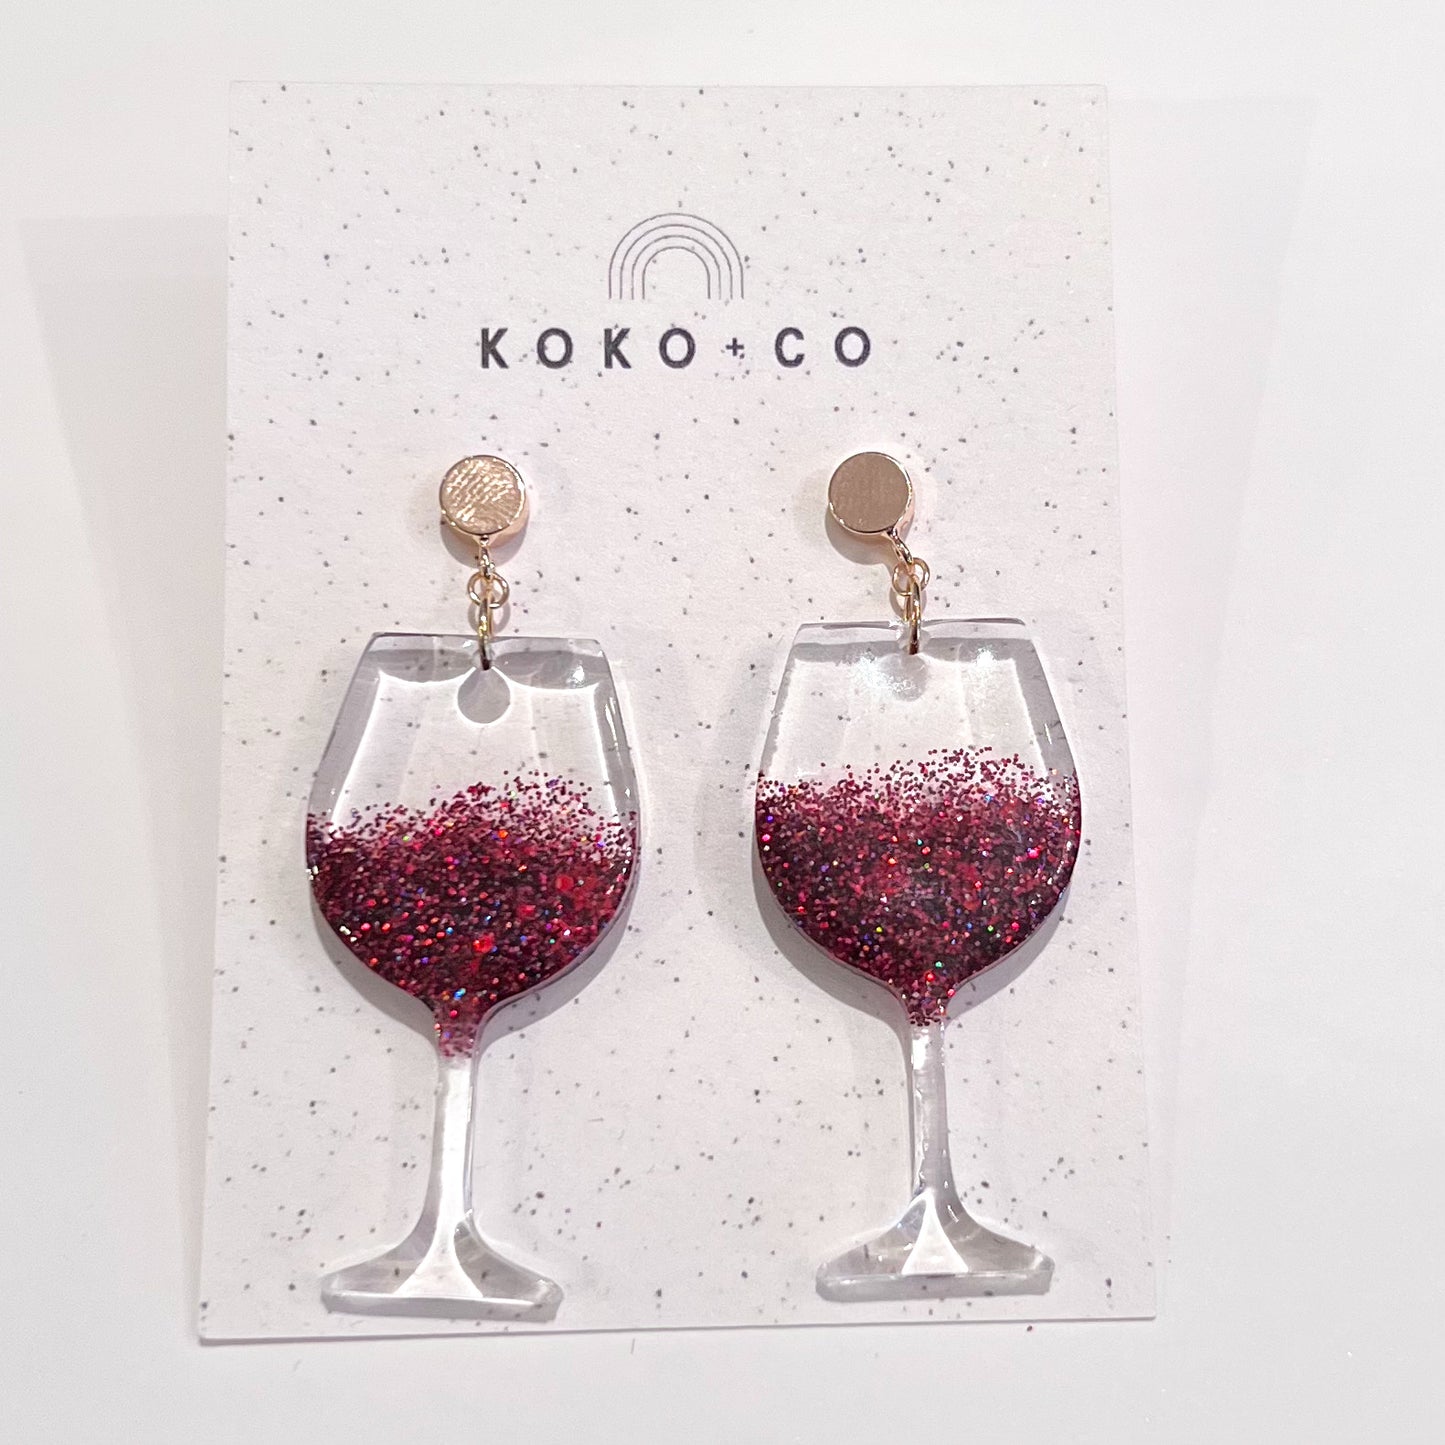 Pour the Wine Earrings in Red